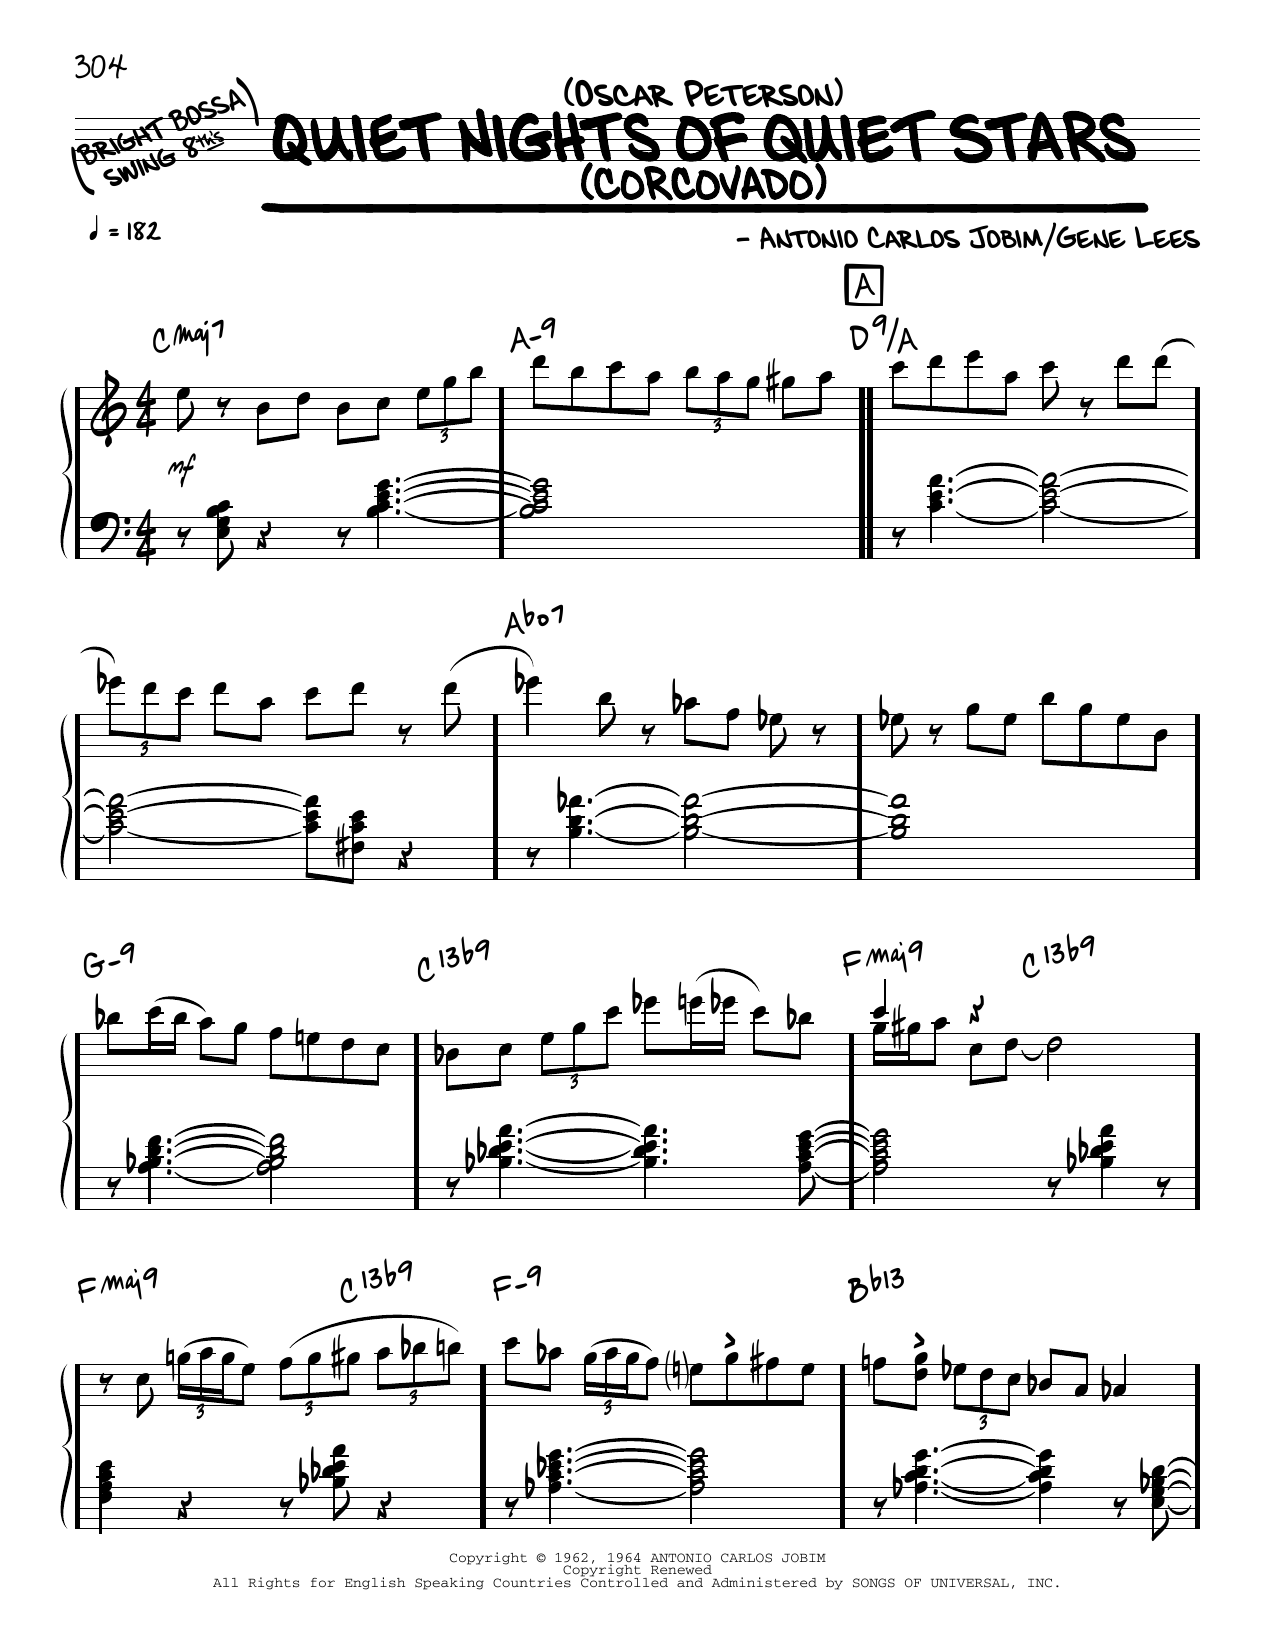 Download Oscar Peterson Quiet Nights Of Quiet Stars (solo only) Sheet Music